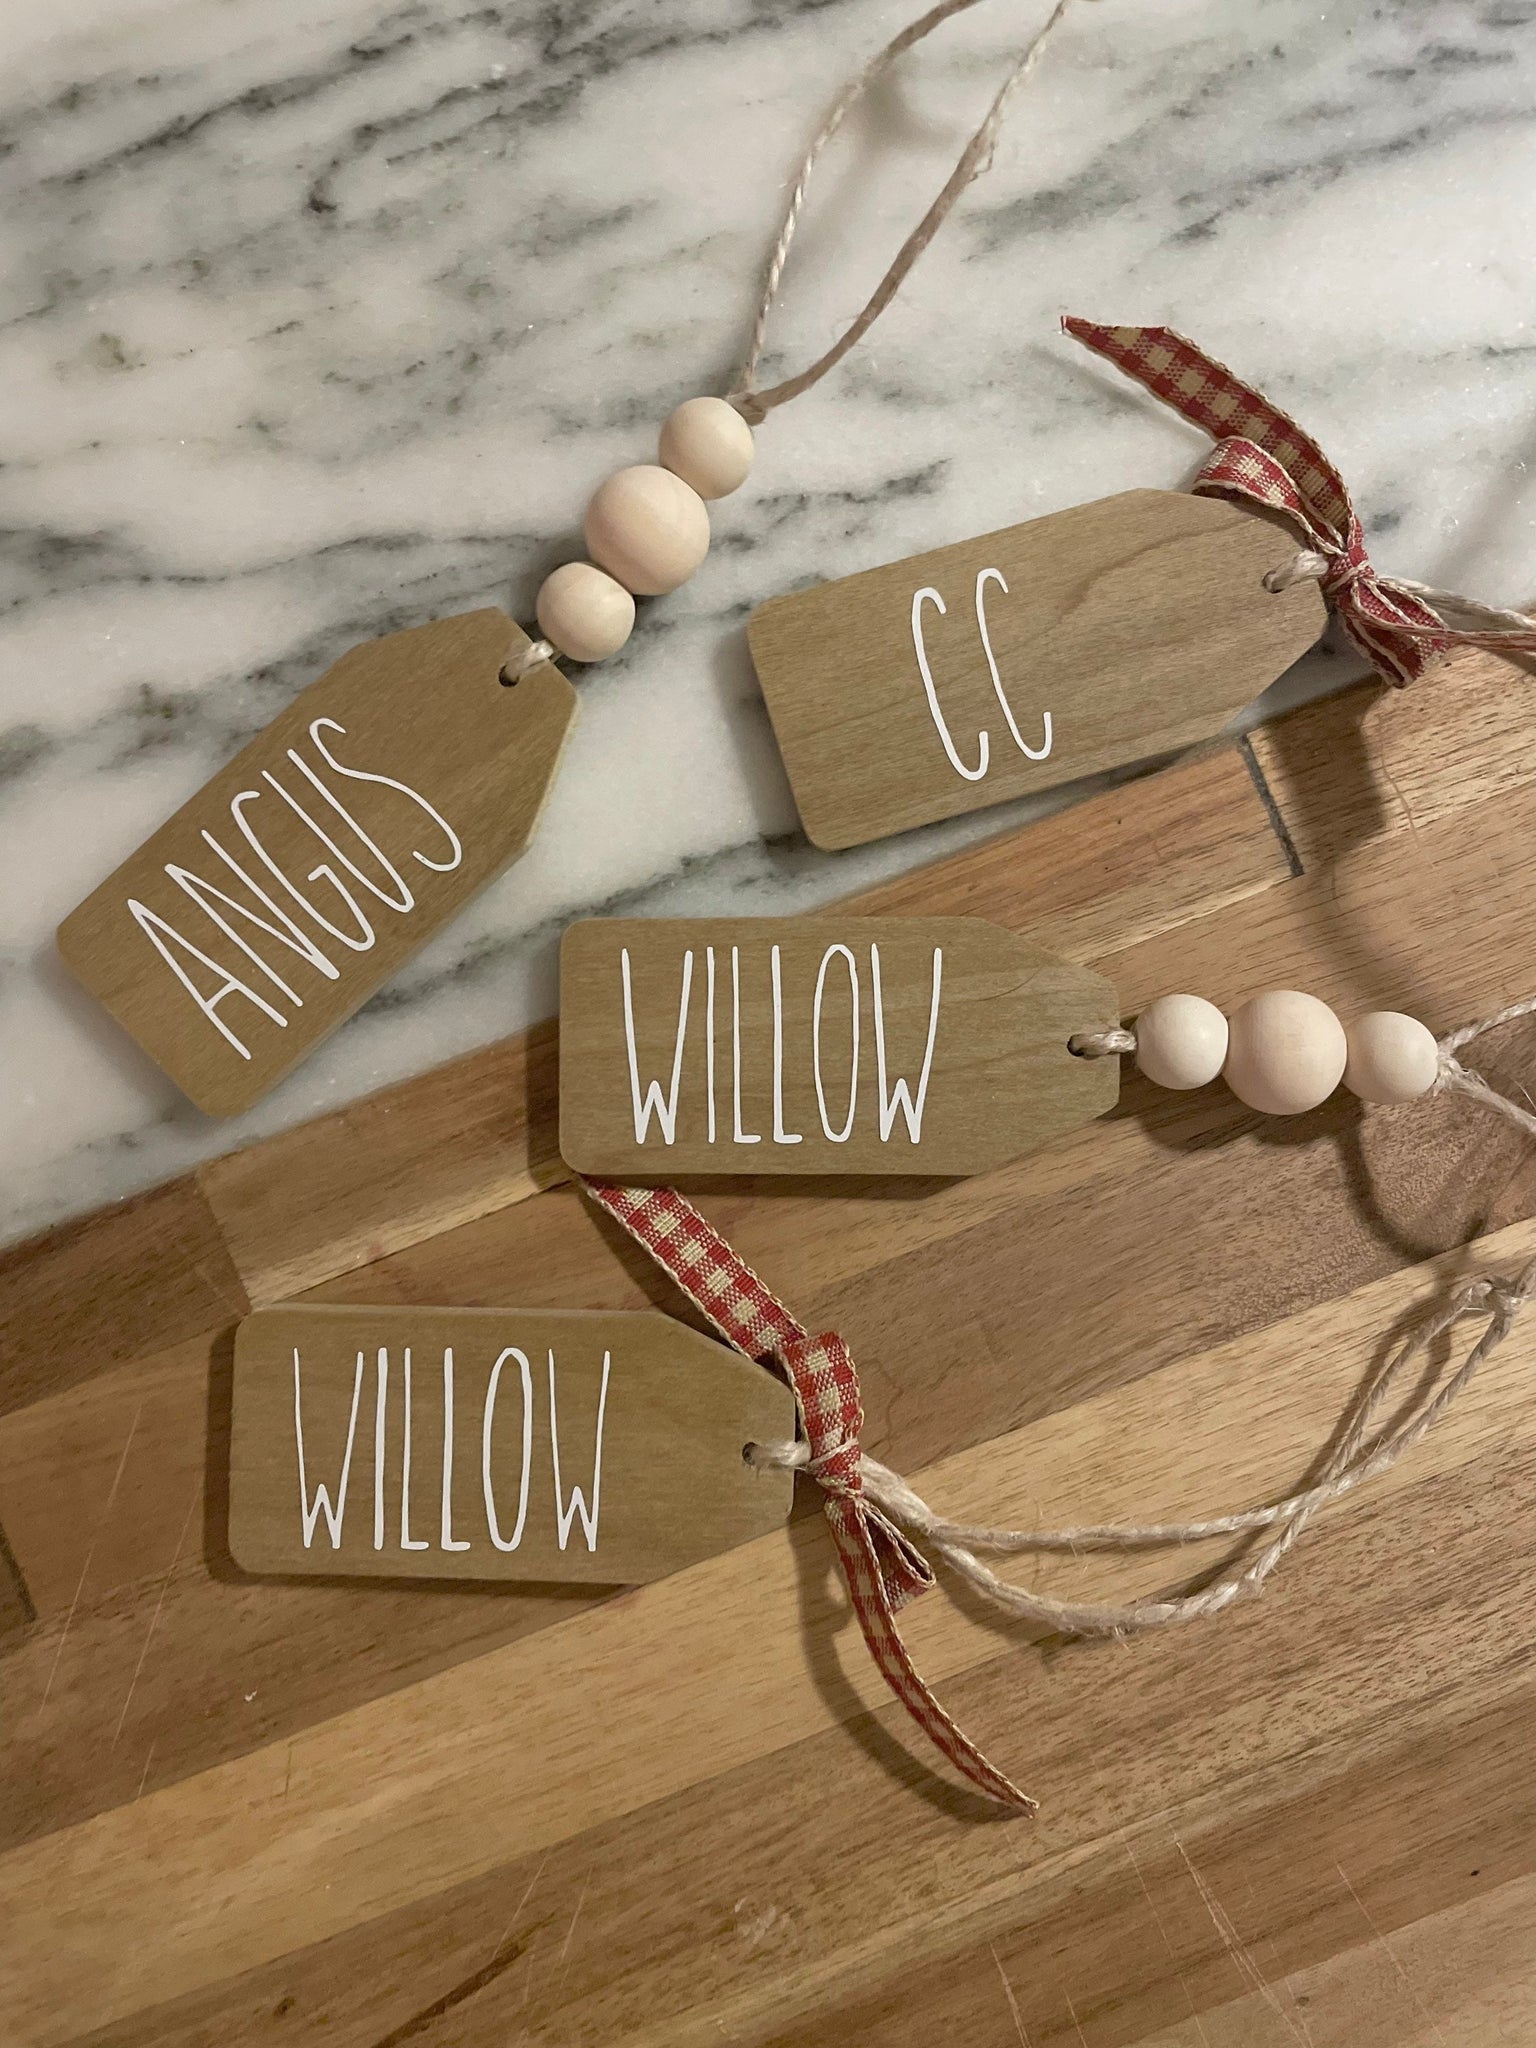 Stocking Name Tags, Personalized  Custom Wood Christmas Gift Tags